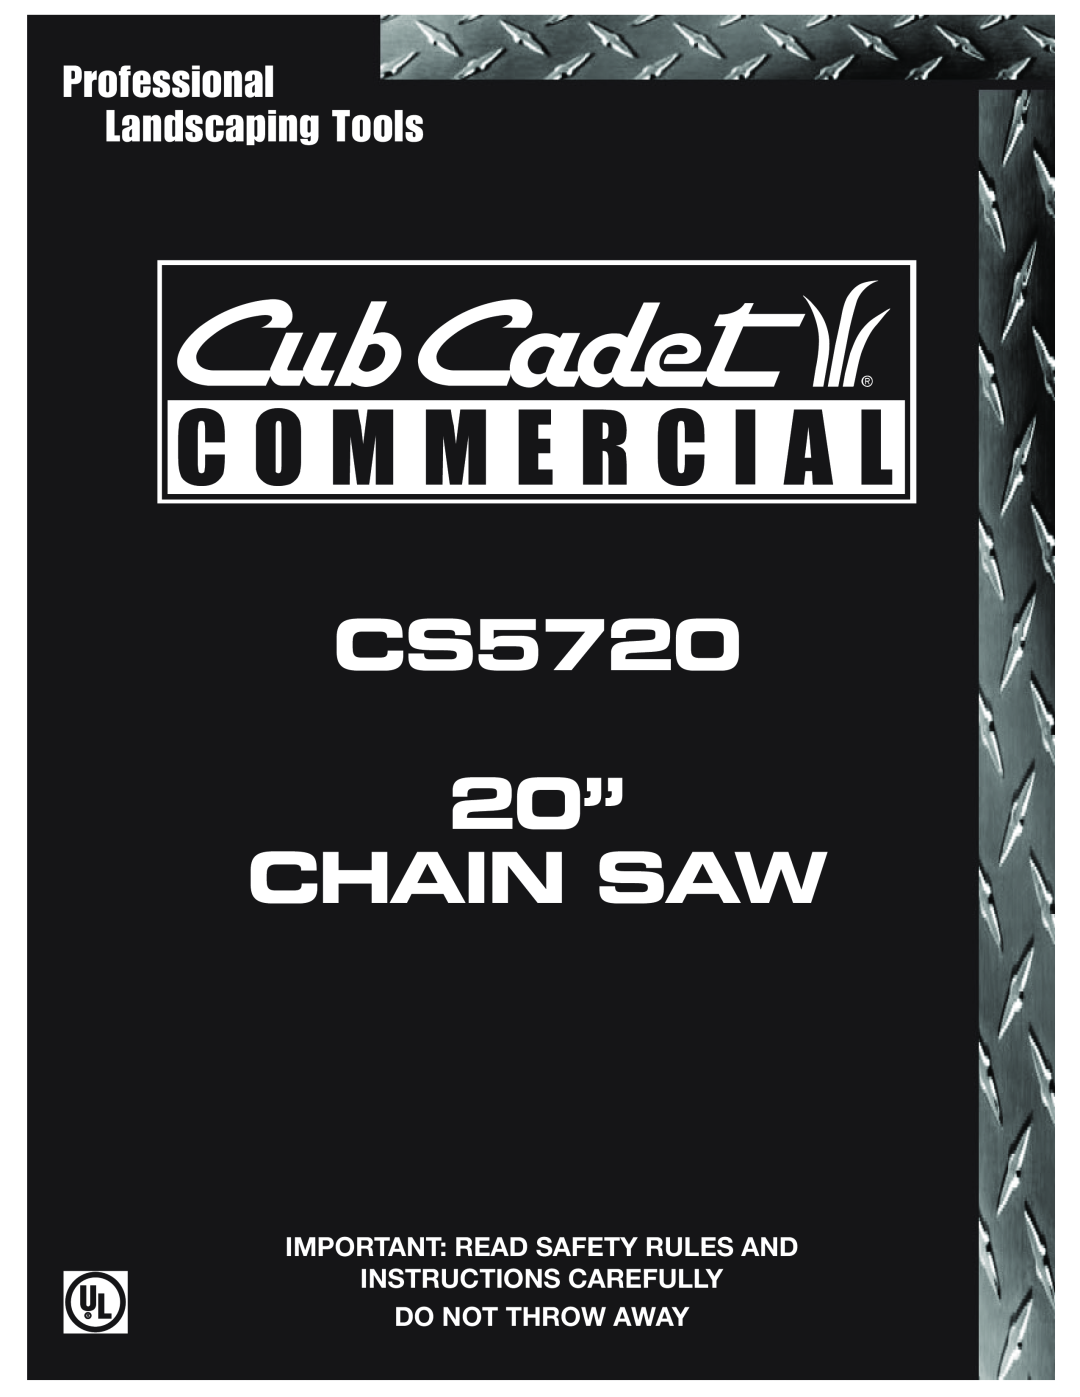 Cub Cadet manual CS5720 20” CHAIN SAW, Professional Landscaping Tools, Important Read Safety Rules And 